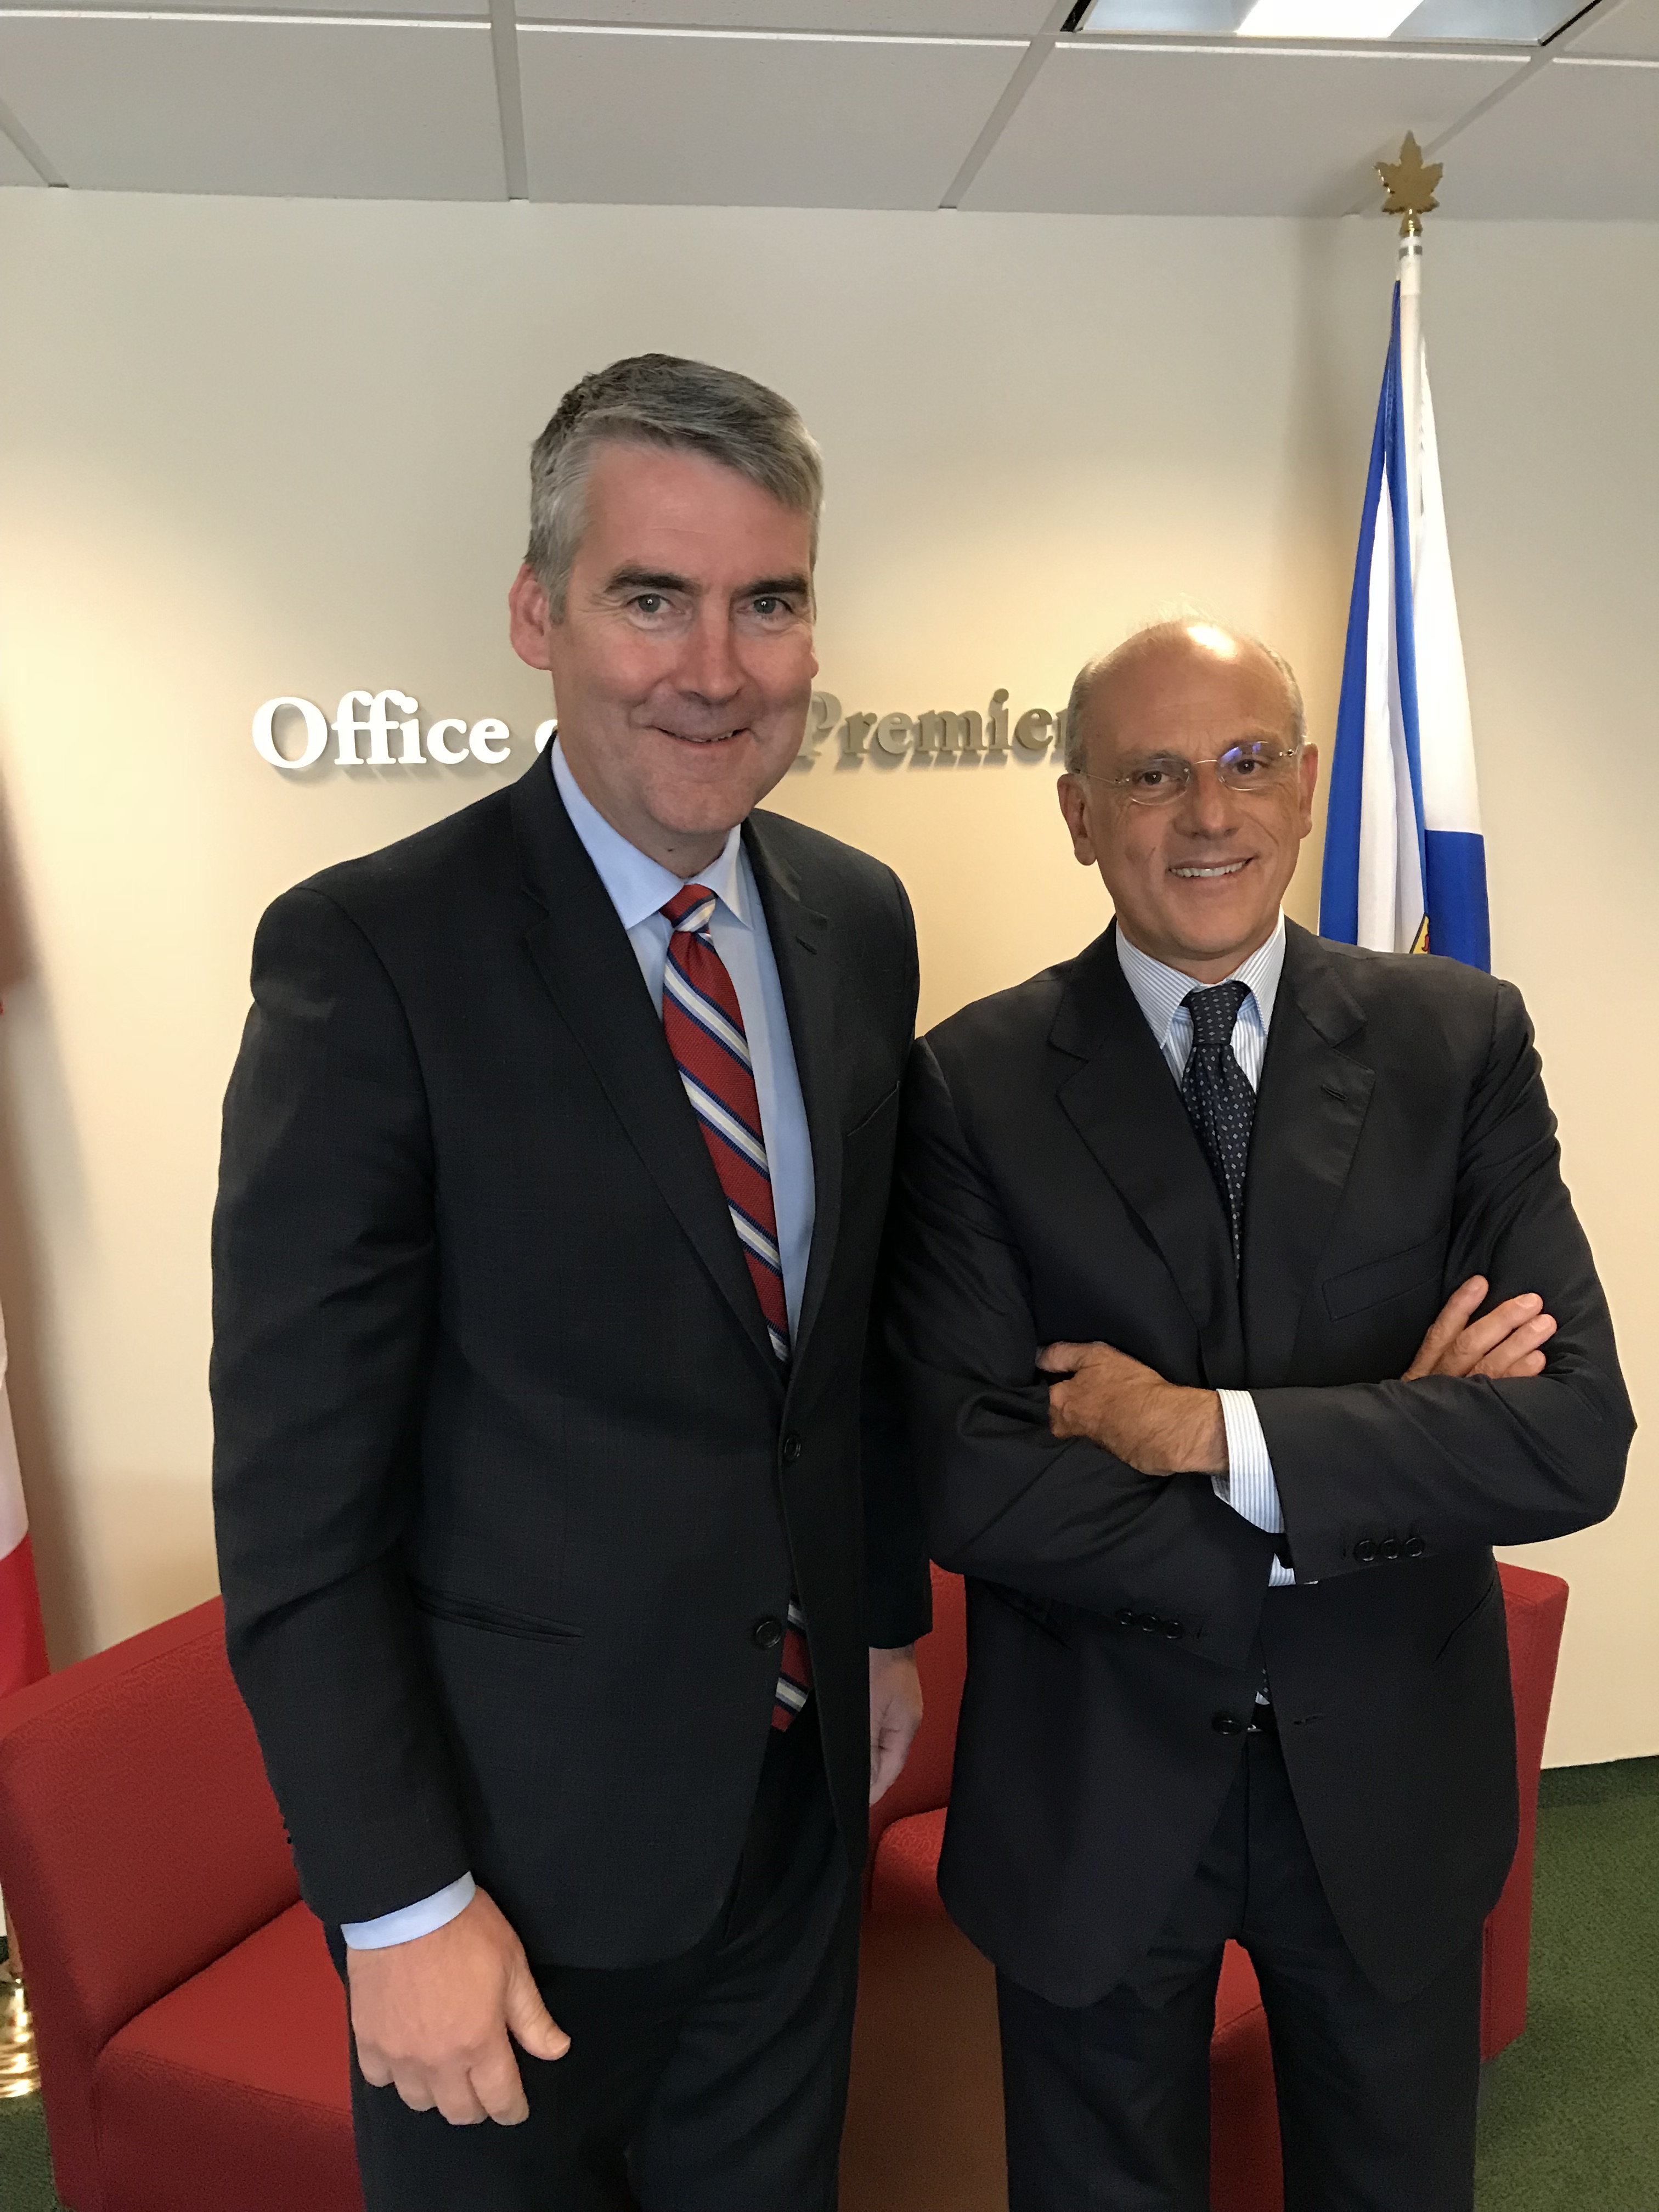 Premier Stephen McNeil meets with the Ambassador of Italy in Canada, Claudio Taffuri